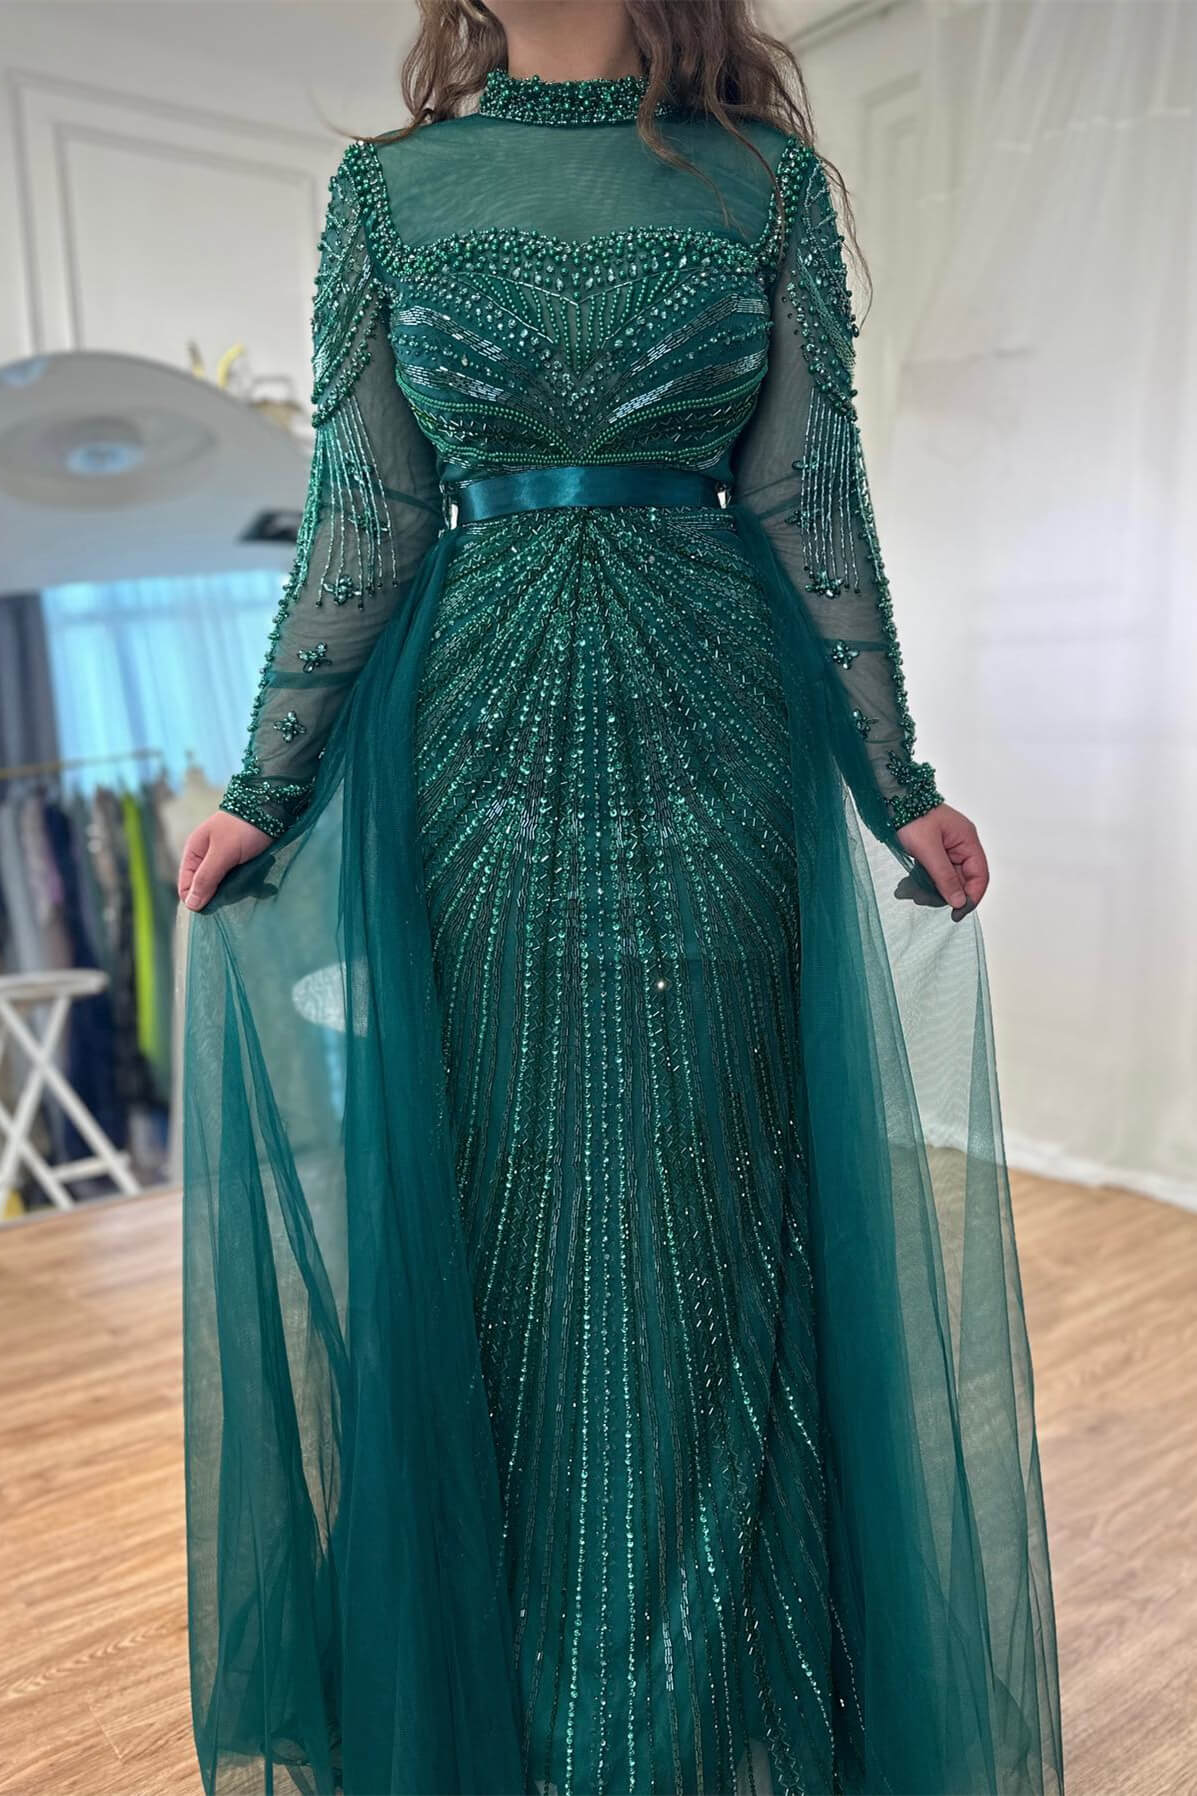 Chic Emerald Green Long Sleeves Mermaid Evening Gown With Beadings Overskirt High Neck - lulusllly